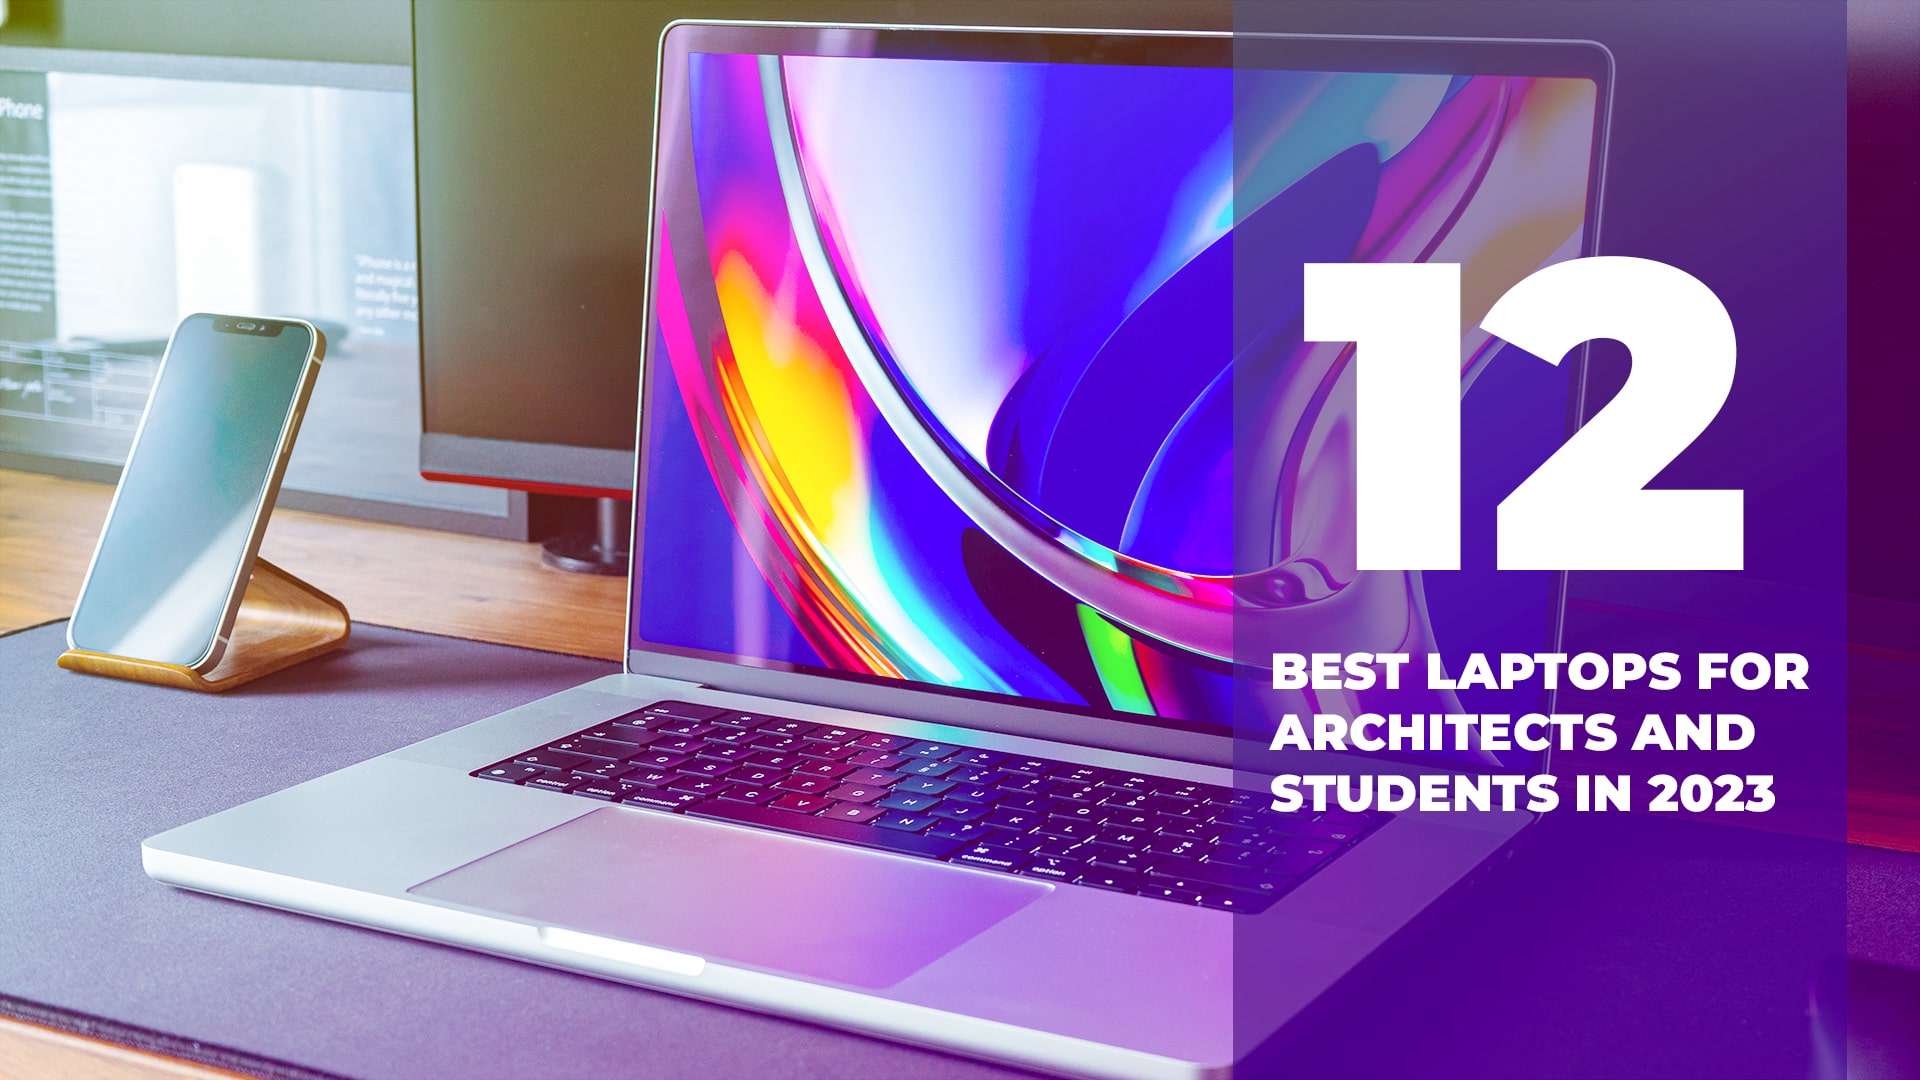 12 Best Laptops For Architects and Students in 2023